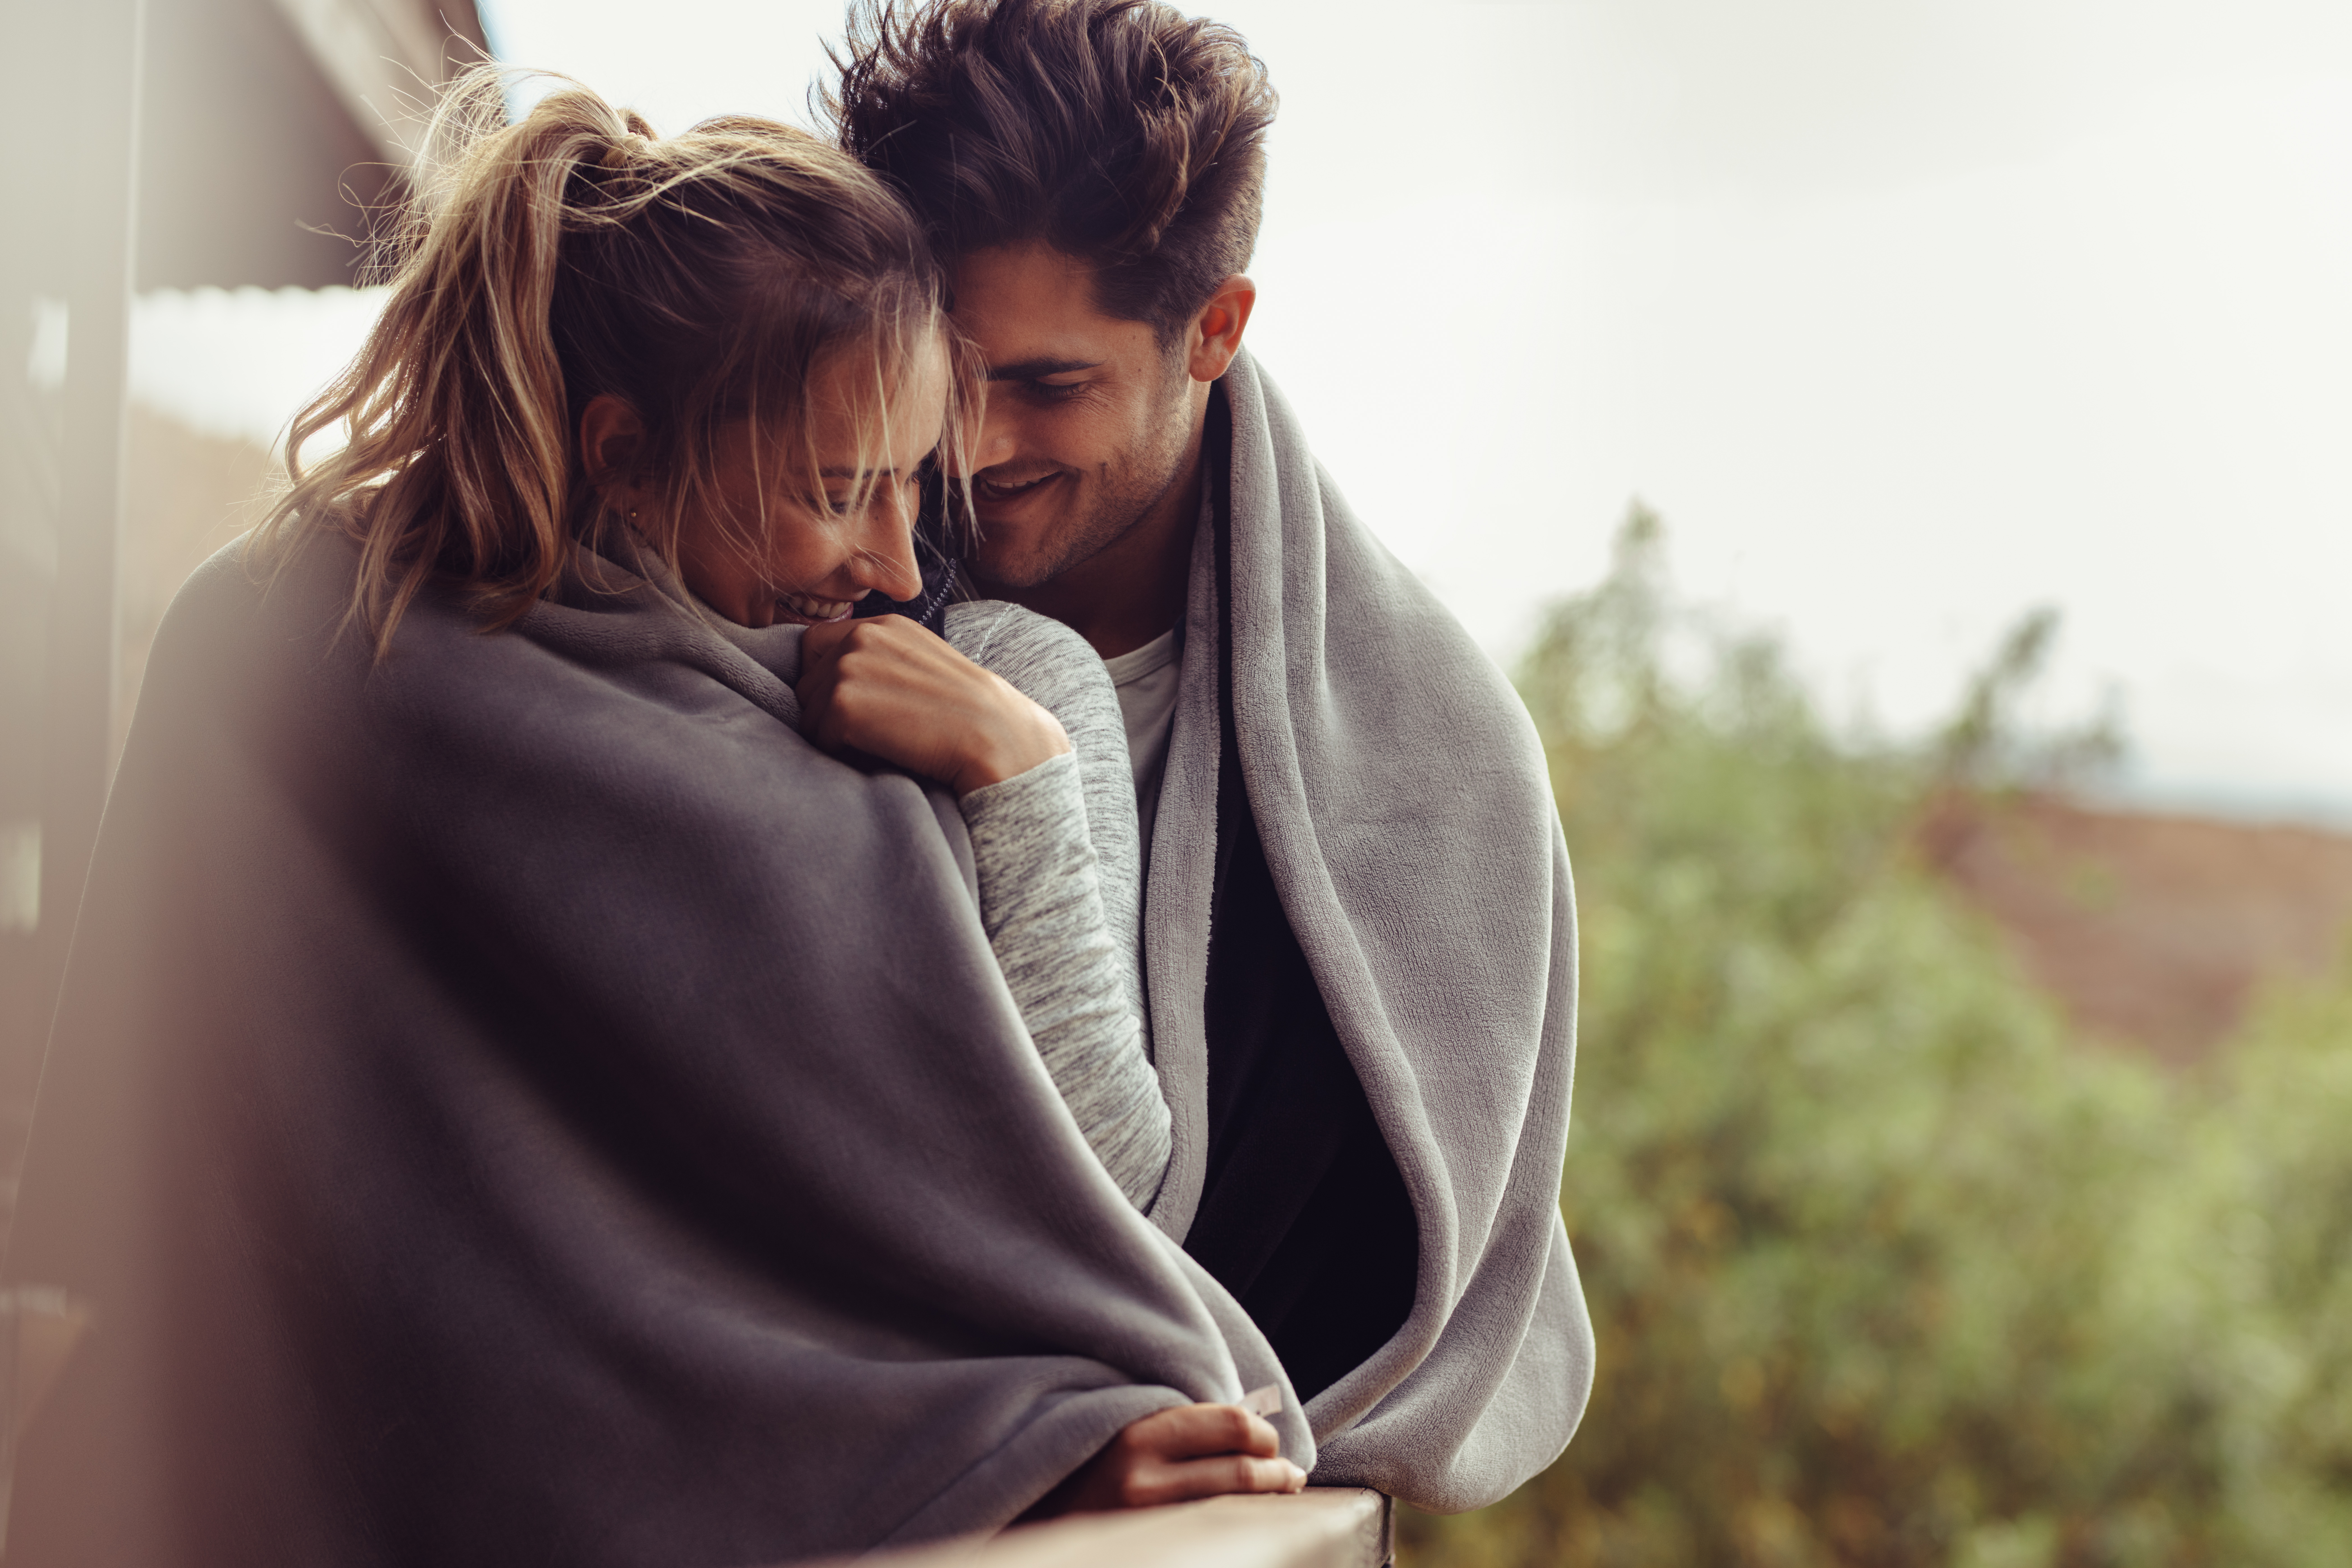 Couple cuddling together outside during winter, wrapped in blankets and enjoying cuffing season.